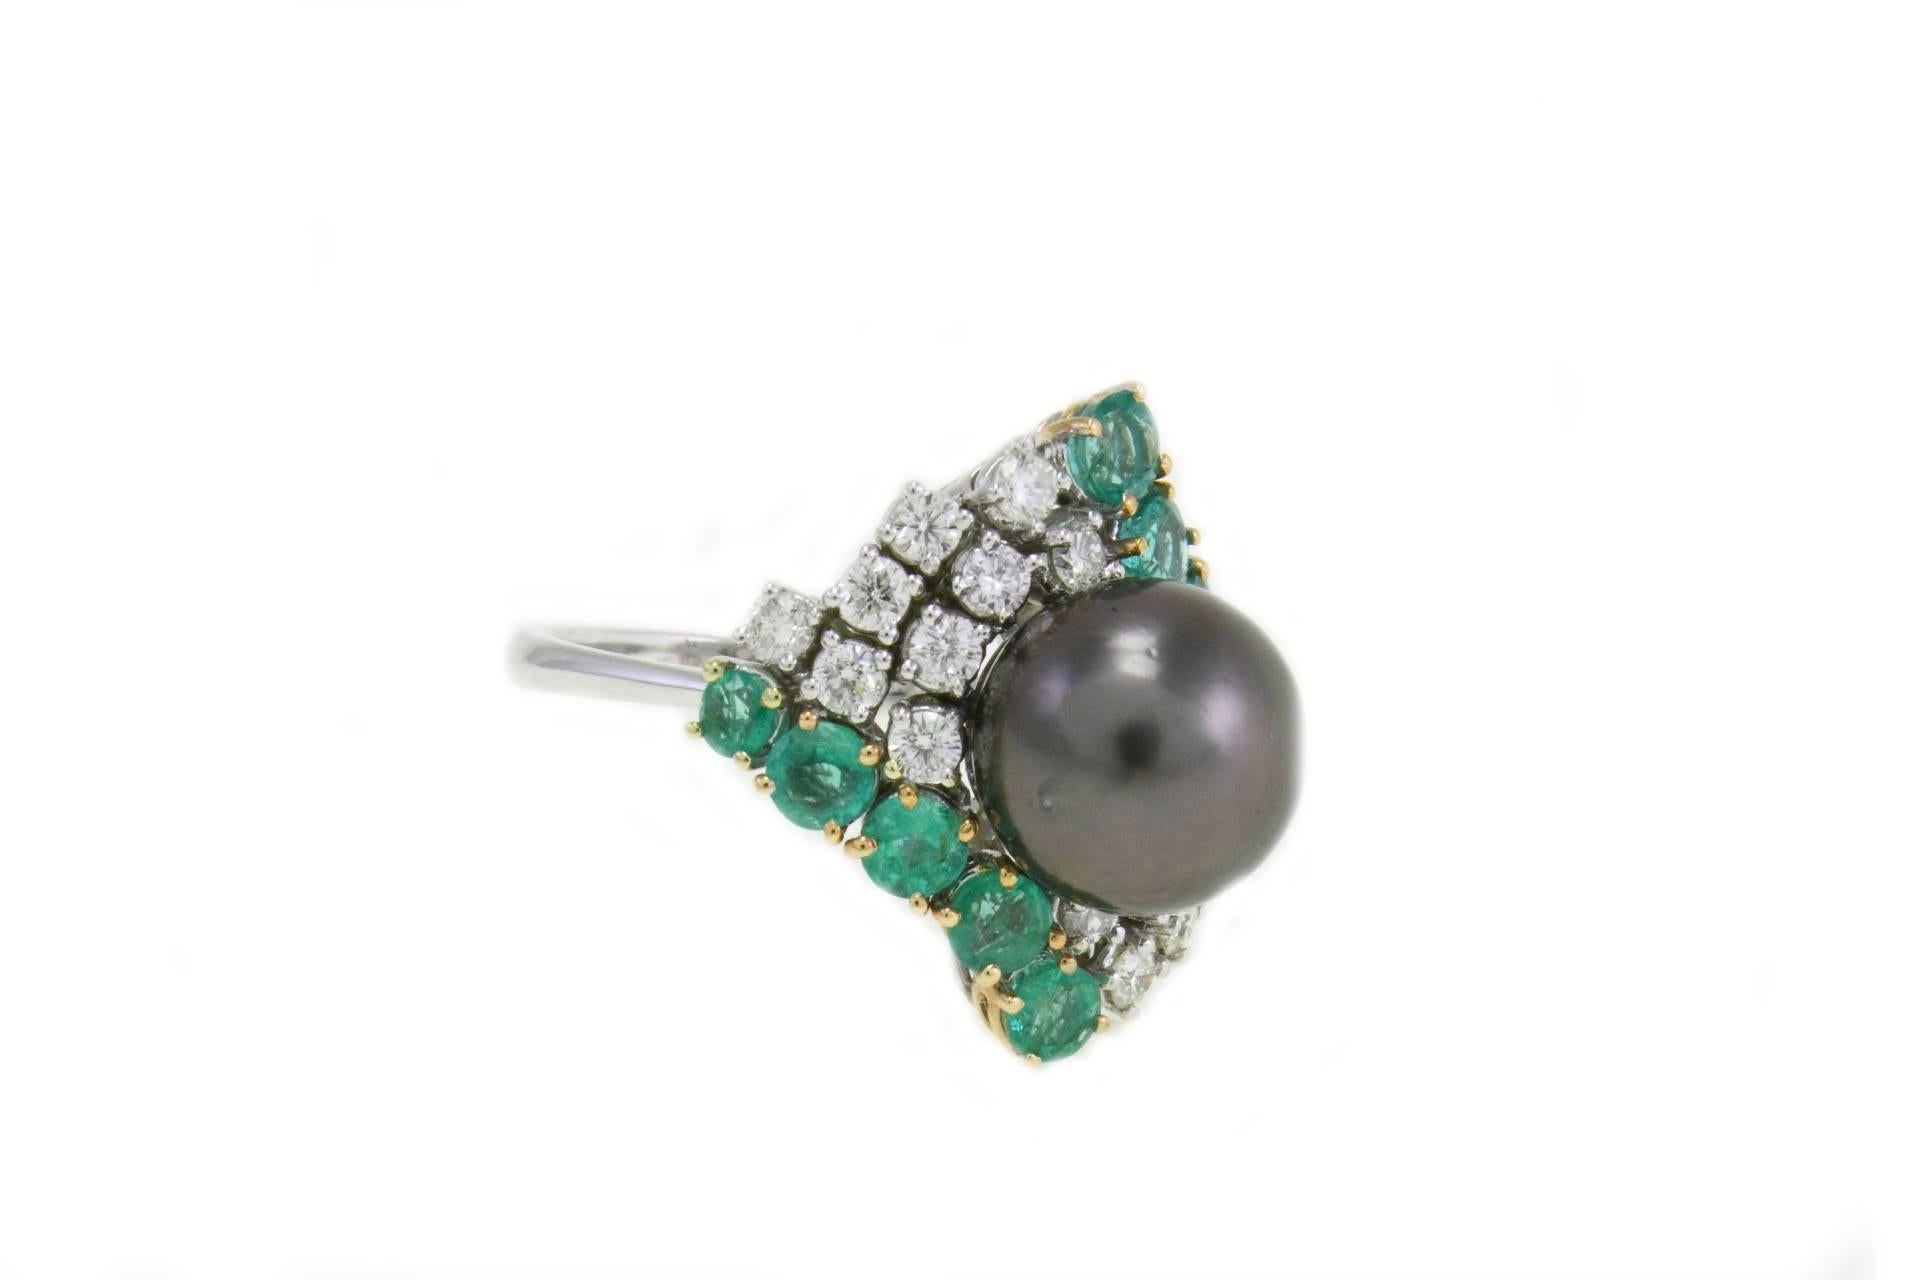 SHIPPING POLICY:
No additional costs will be added to this order.
Shipping costs will be totally covered by the seller (customs duties included).

Sparkling ring in 14kt white gold composed of a central black pearl surrounded by a perfect